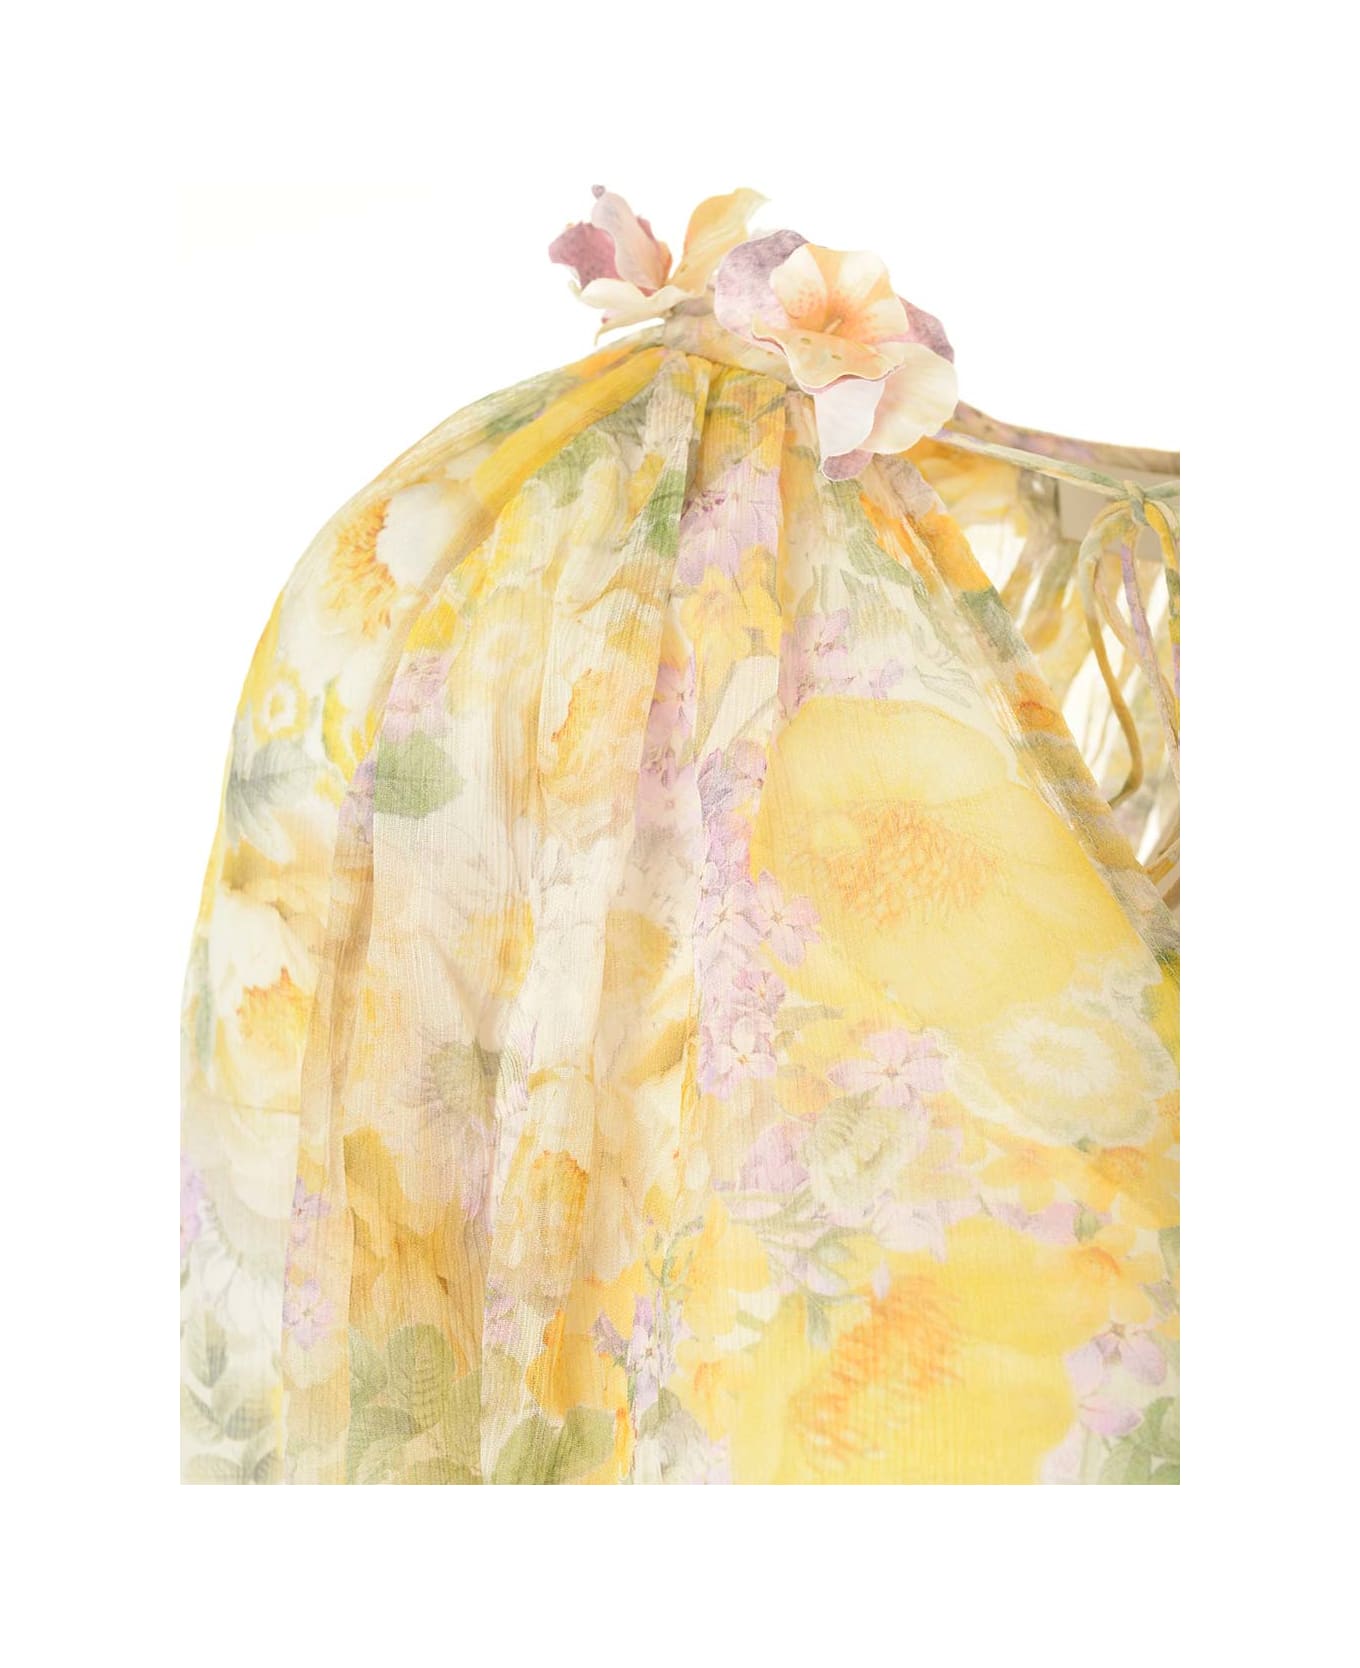 Zimmermann 'harmony' Floral Print Blouse - MULTICOLOR ブラウス